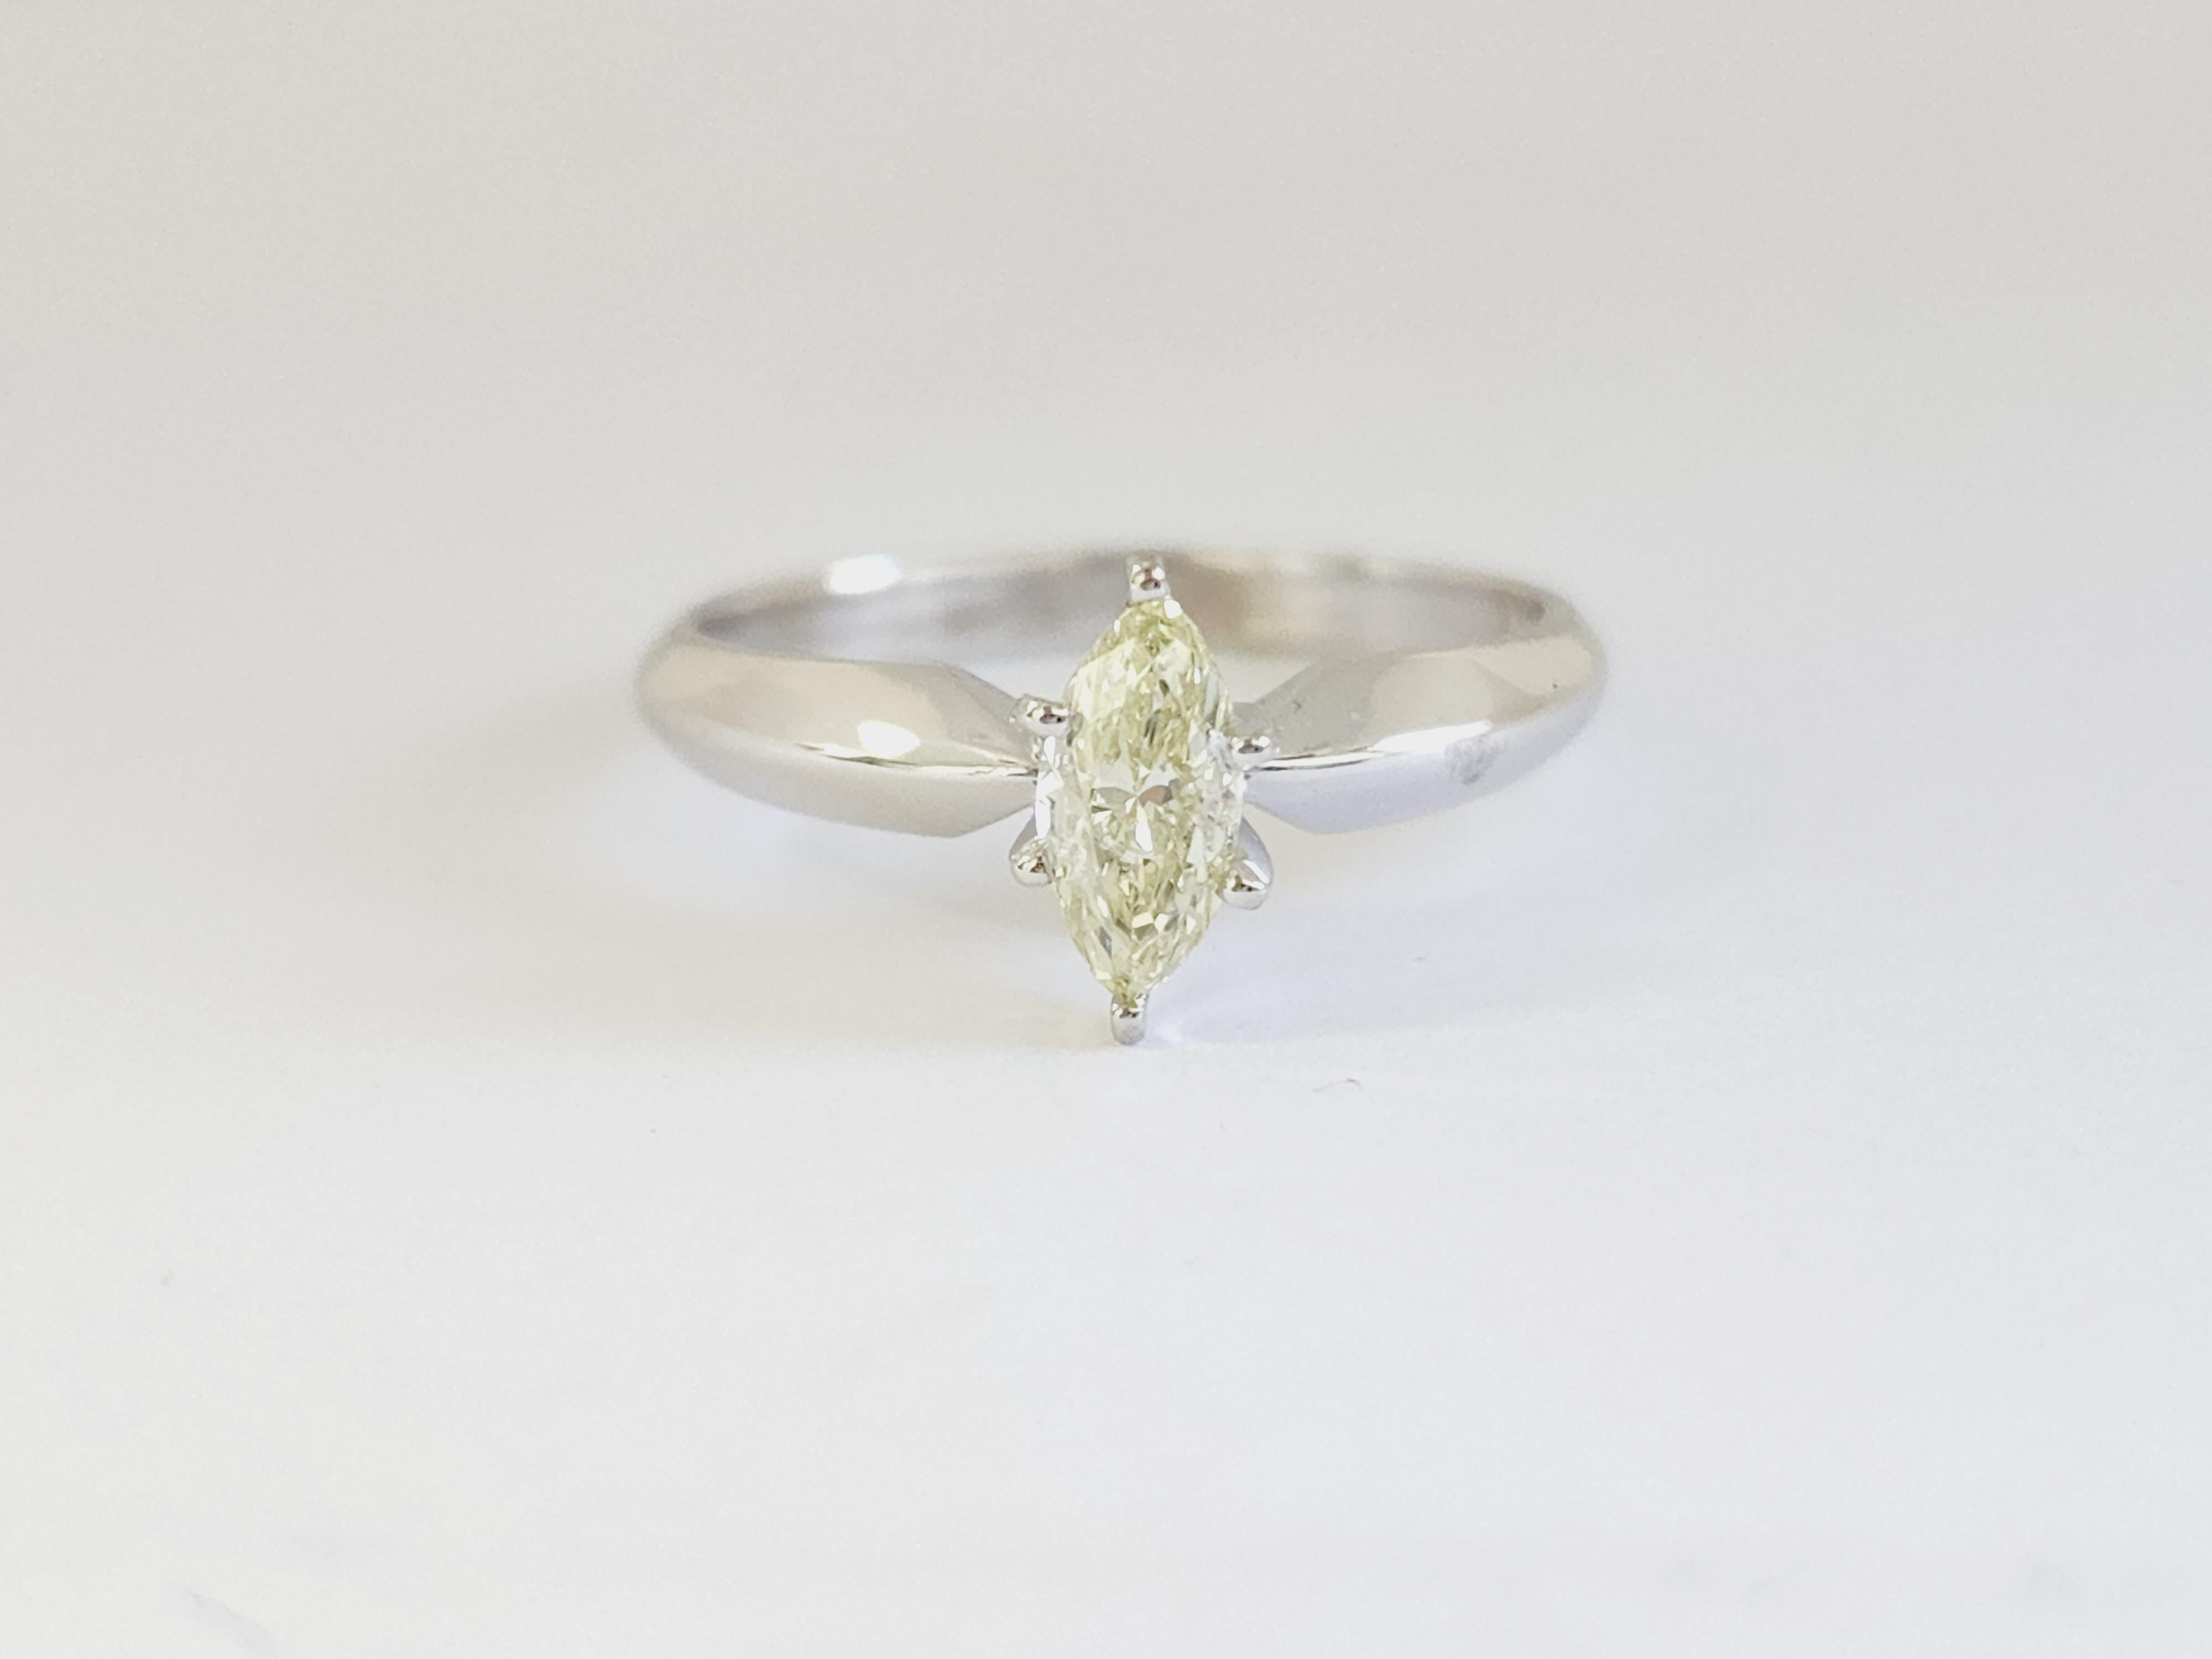 Natural Marquise shape diamond weighing 0.50 carats GIA . set on 14K white gold. 
Diamond Color: Light yellow
Ring size 7